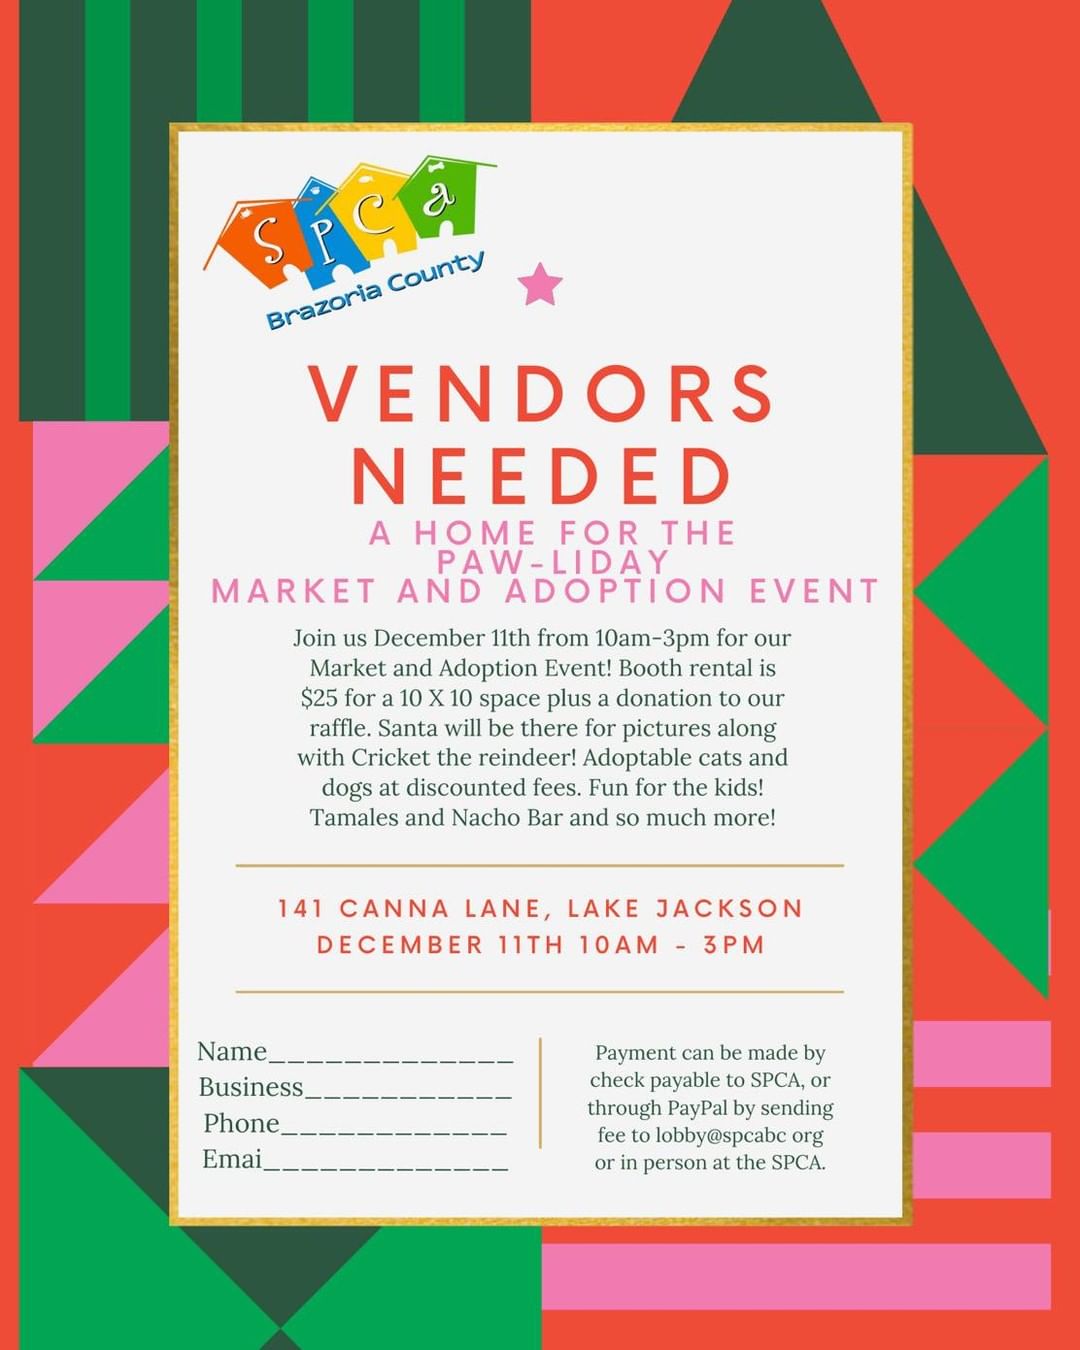 The SPCA of Brazoria County is seeking vendors for our Home for the Paw-lidays Market and Adoption event.  For more information or to participate, please email Nikki at nicole@spcabc.org.